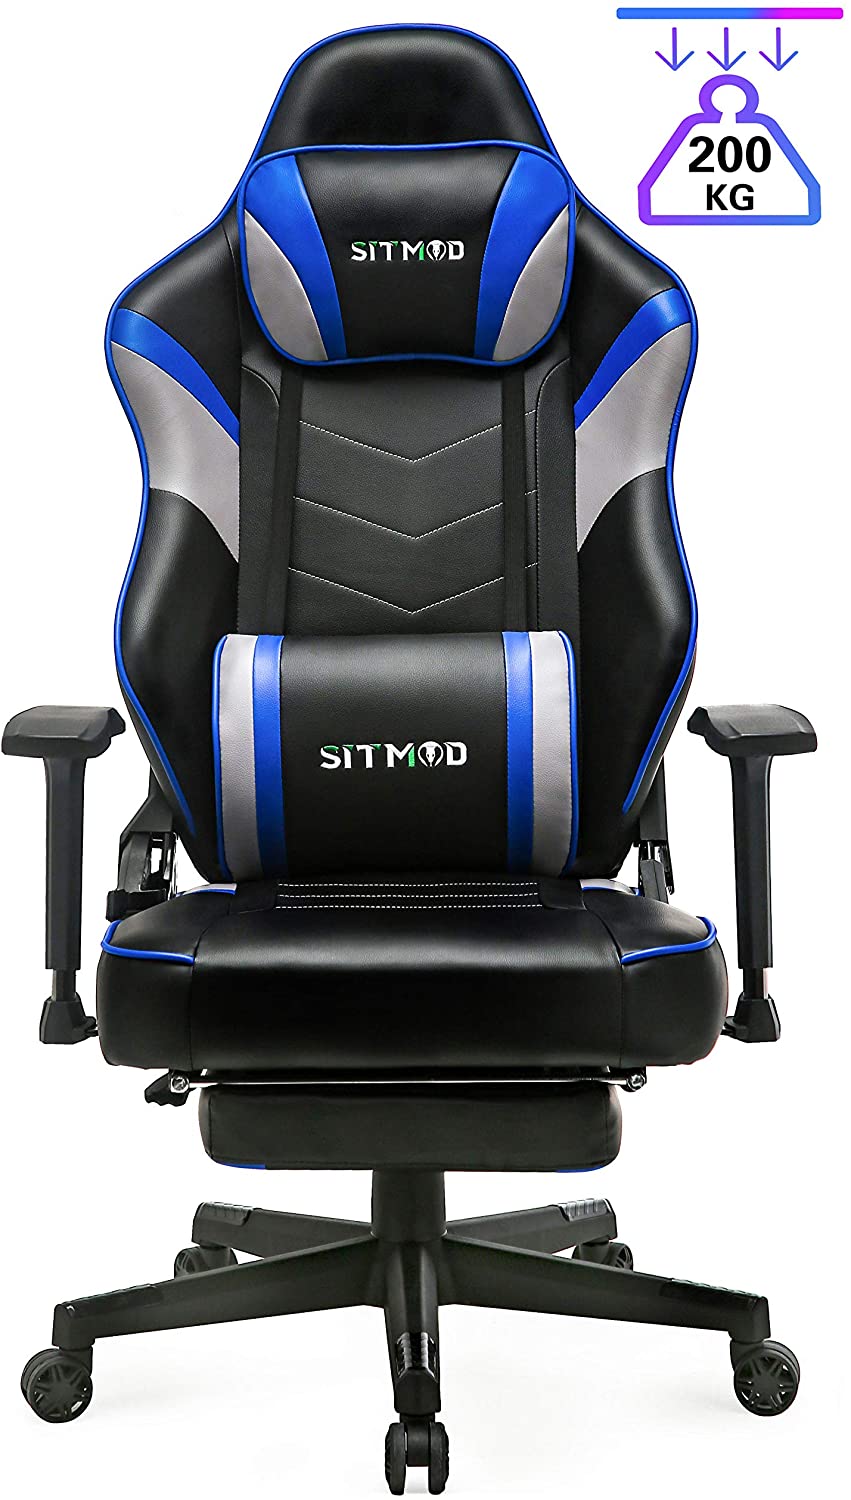 Comfy Ergonomic Armchair Big Man Gamer Chairs E-Sport PU Leather Rocking Desk Chair with Footrest-Orange SITMOD Gaming Chair PC Computer Racing Chair 200kg Reclinable with Massage Lumbar Support 